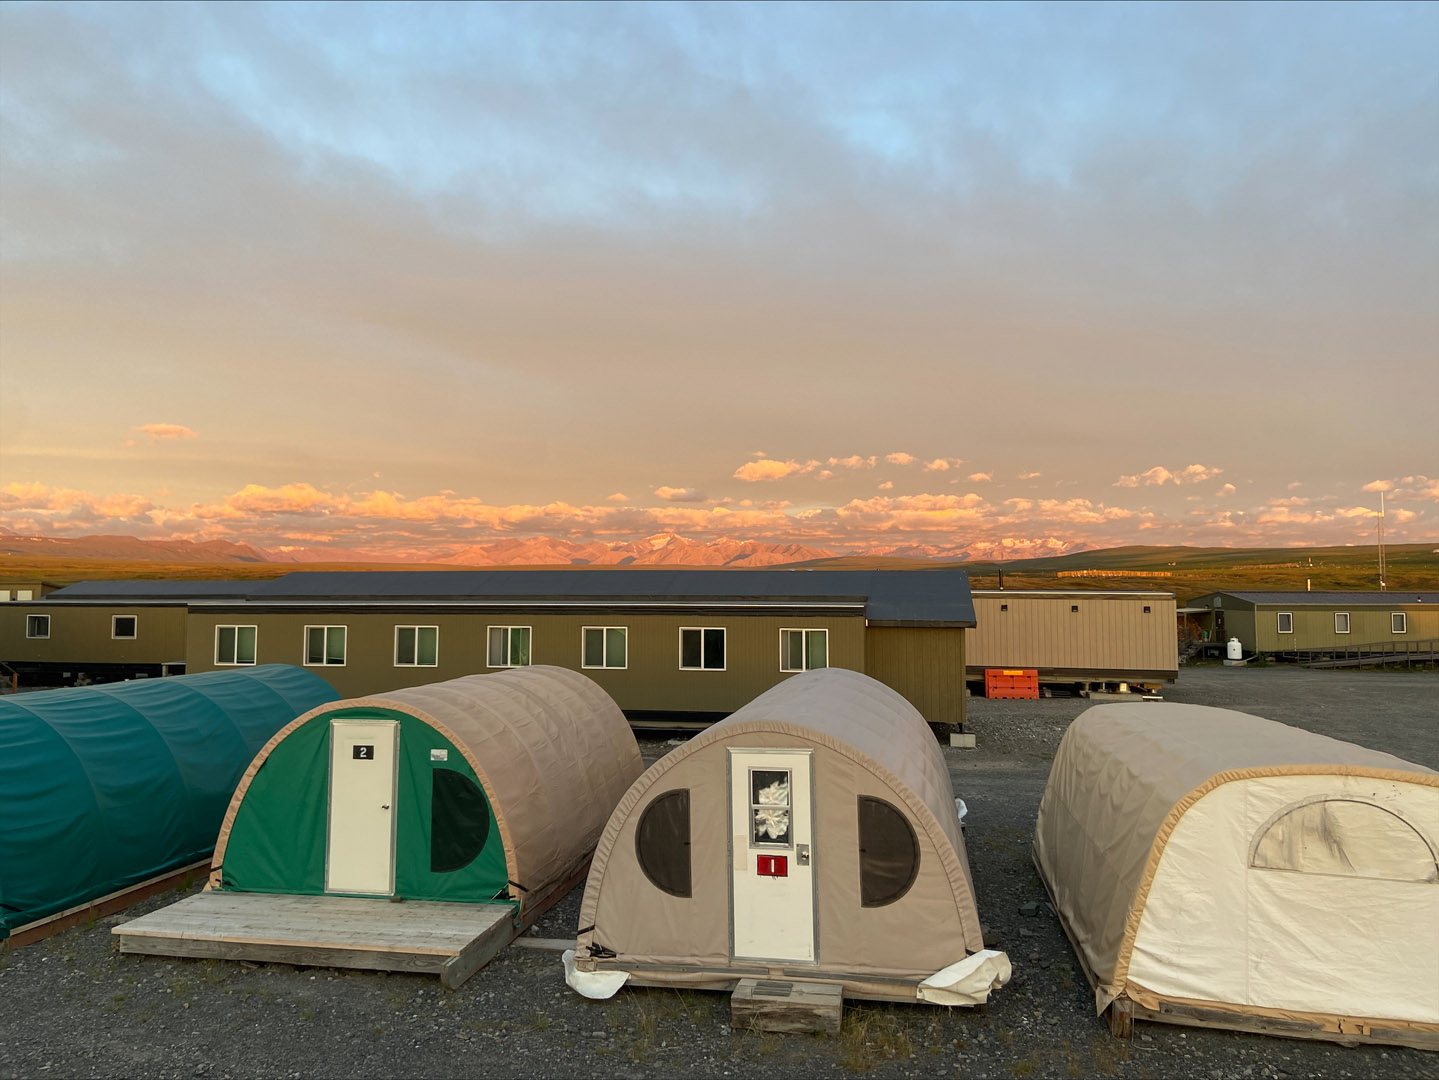 The students slept in Weatherports, which are shelters that protect against cold weather and snow. Photo taken by Caroline Brose '22 in July 2022. 